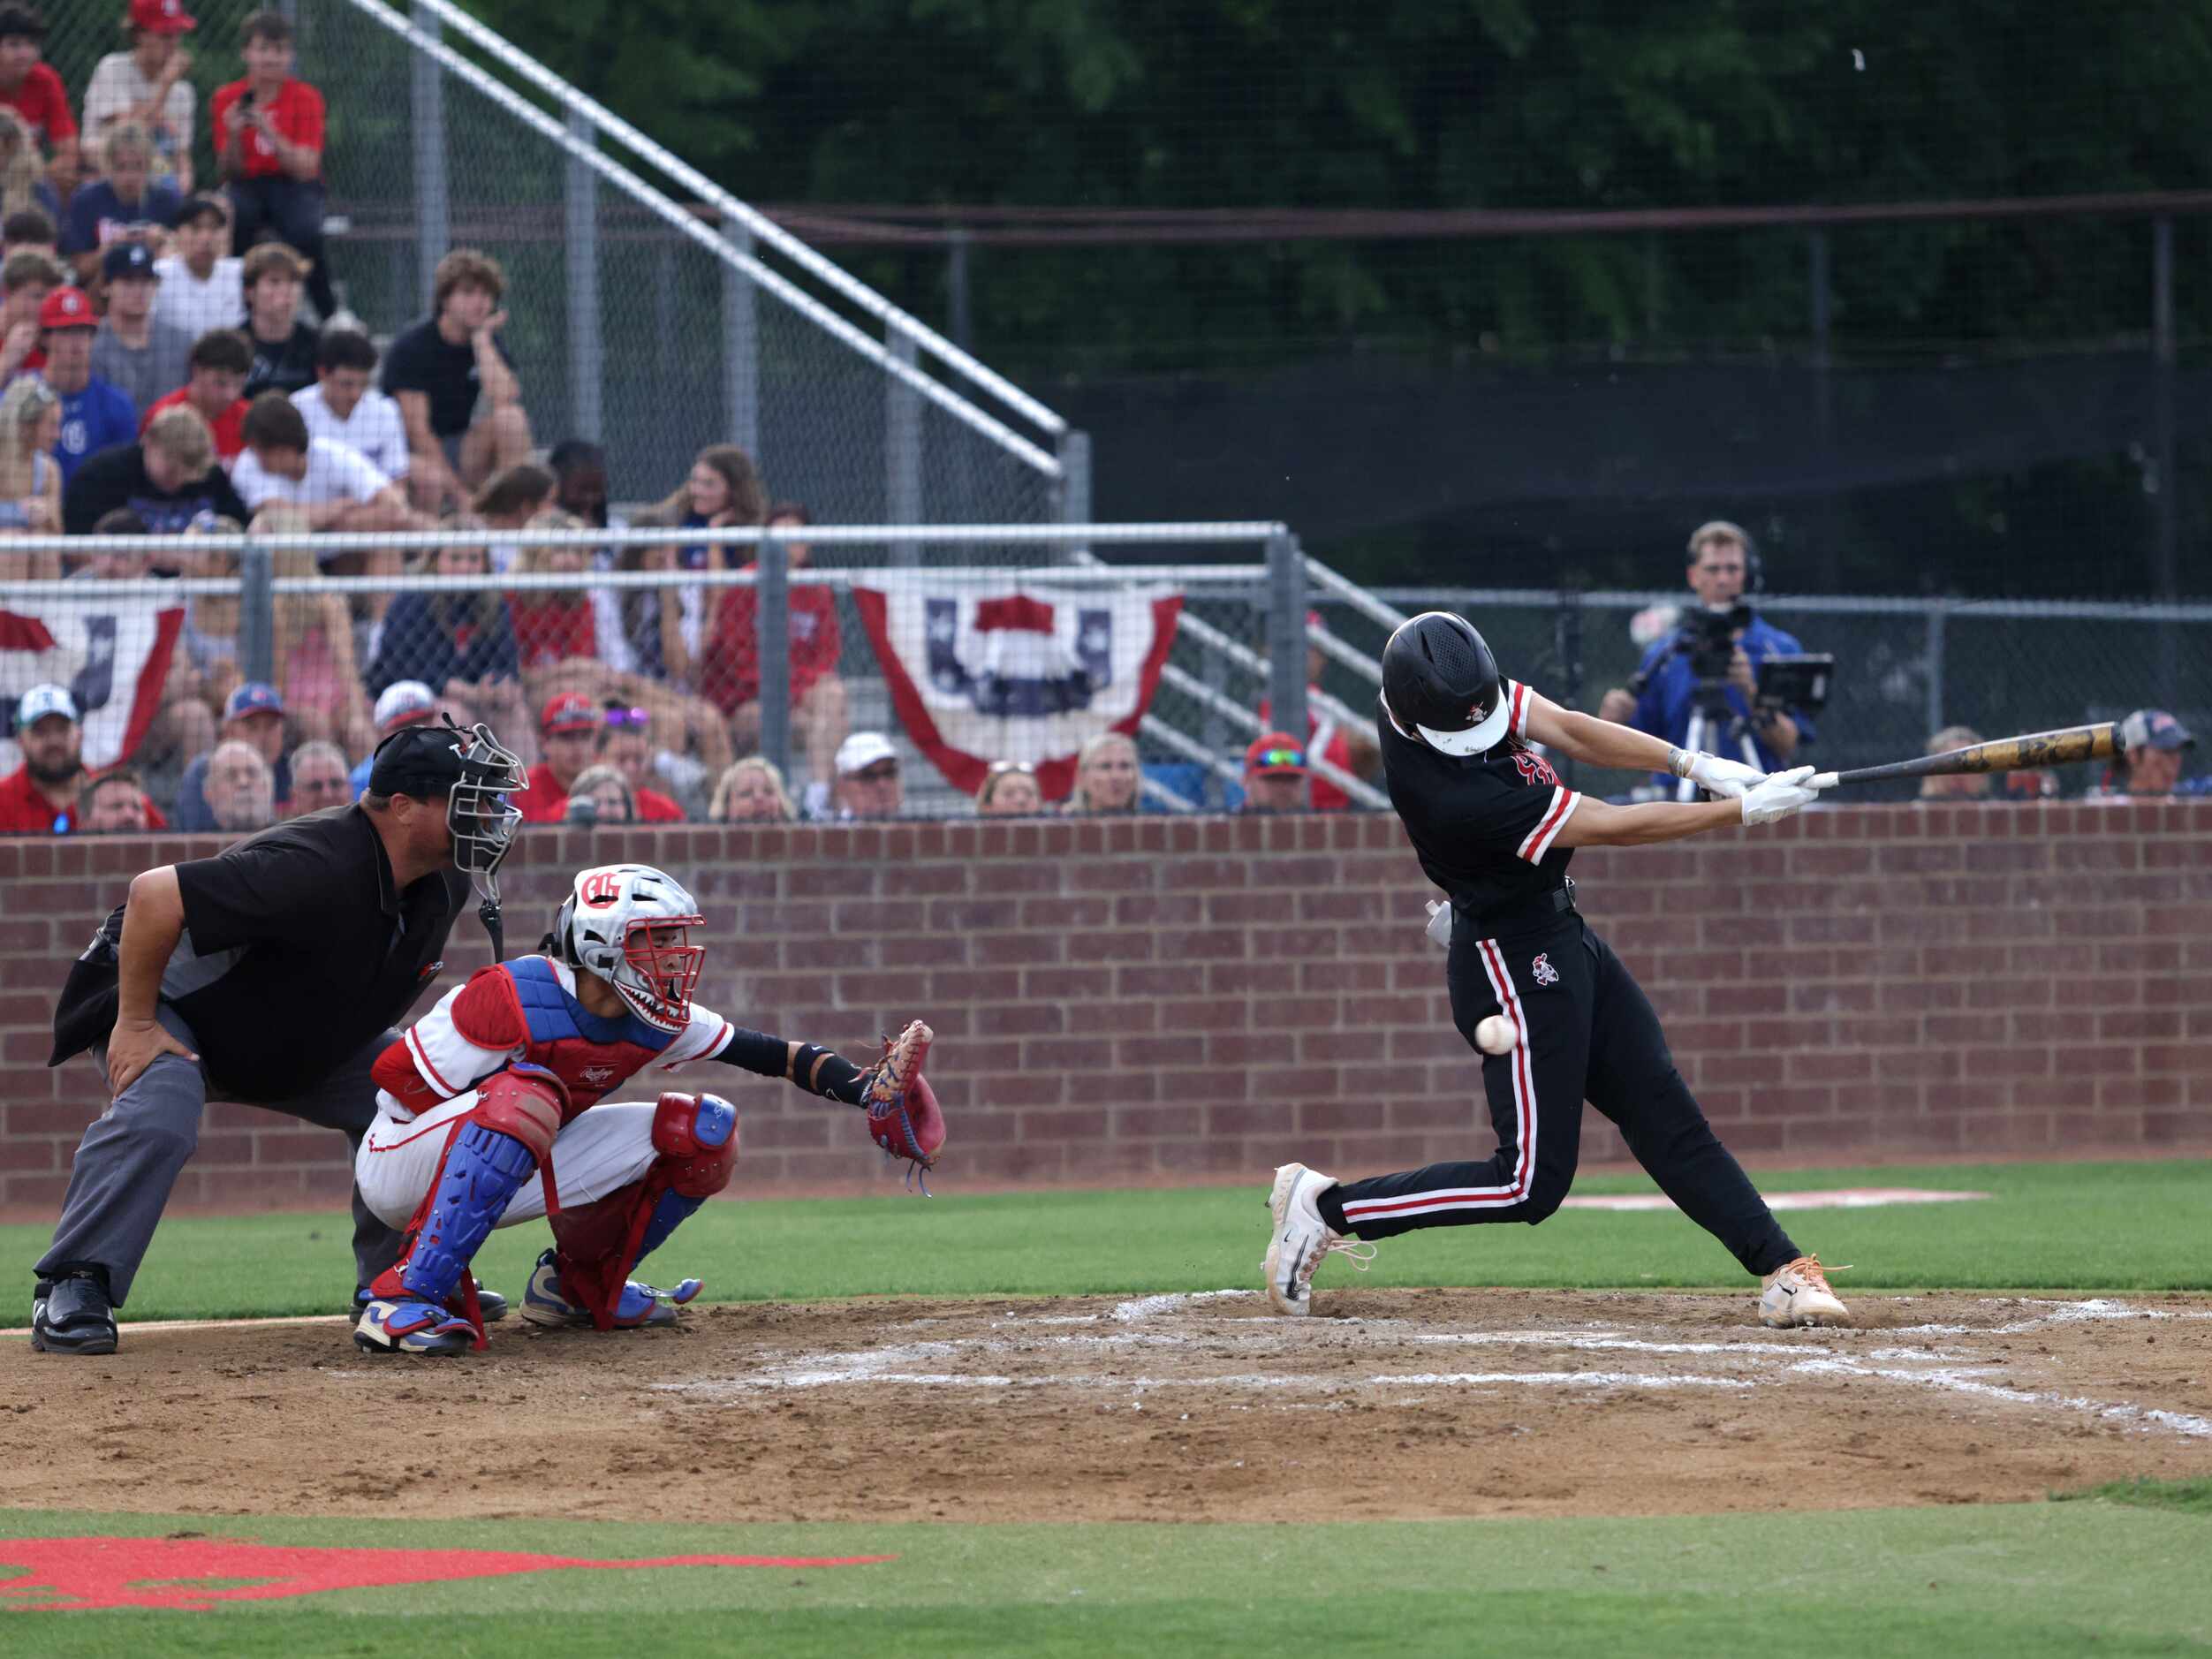 Argyle High School player Brayden Rosckes swings and misses during a game against Grapevine...